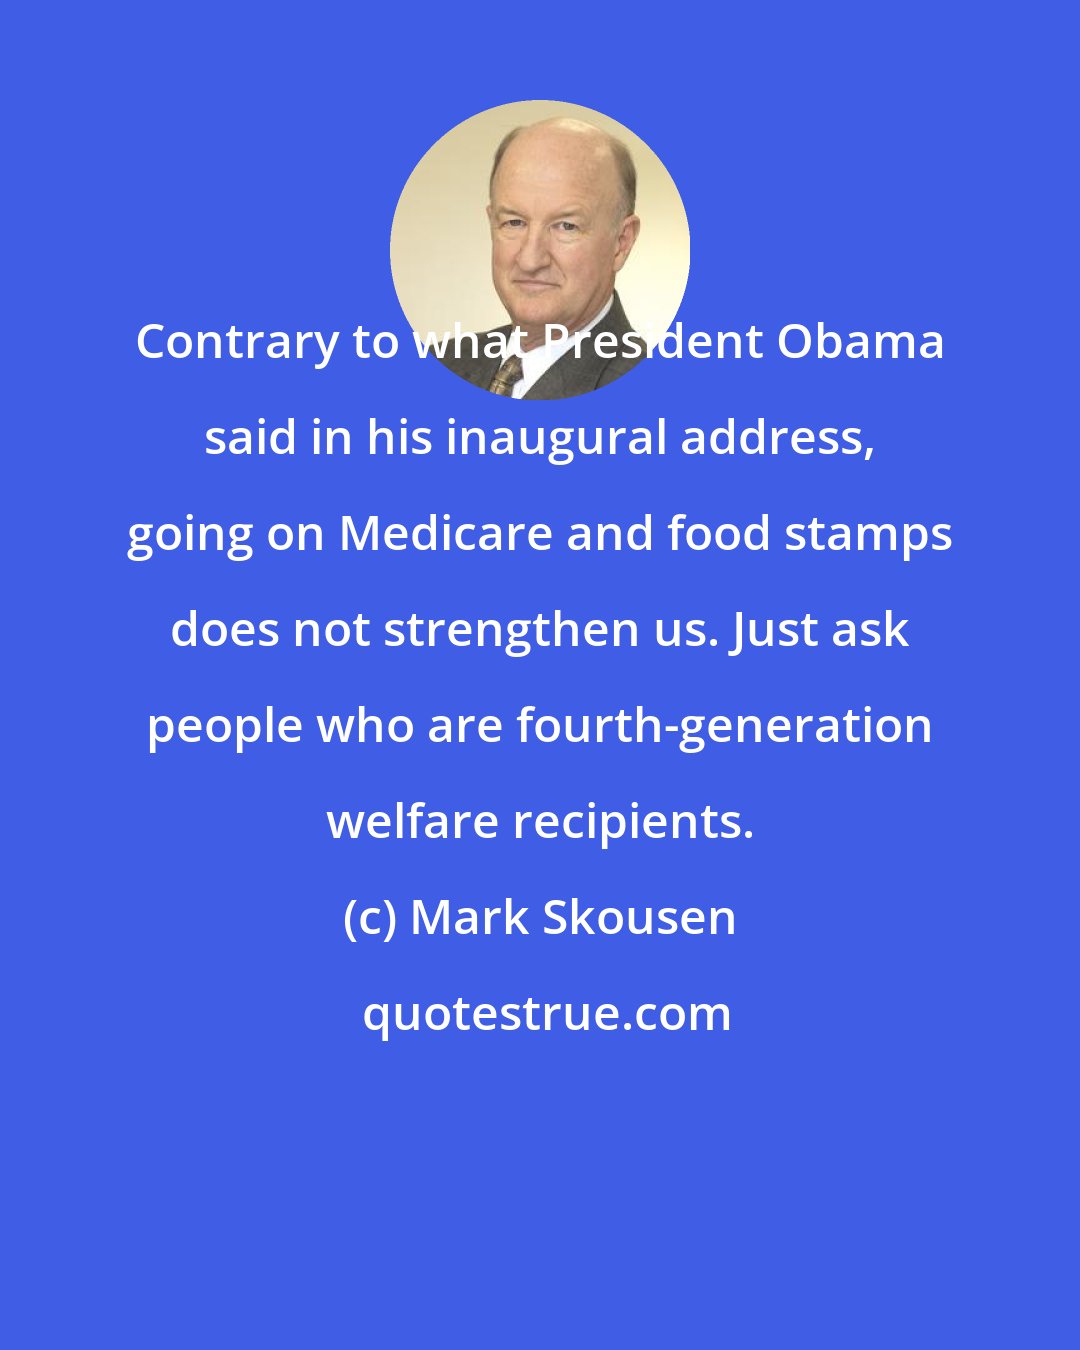 Mark Skousen: Contrary to what President Obama said in his inaugural address, going on Medicare and food stamps does not strengthen us. Just ask people who are fourth-generation welfare recipients.